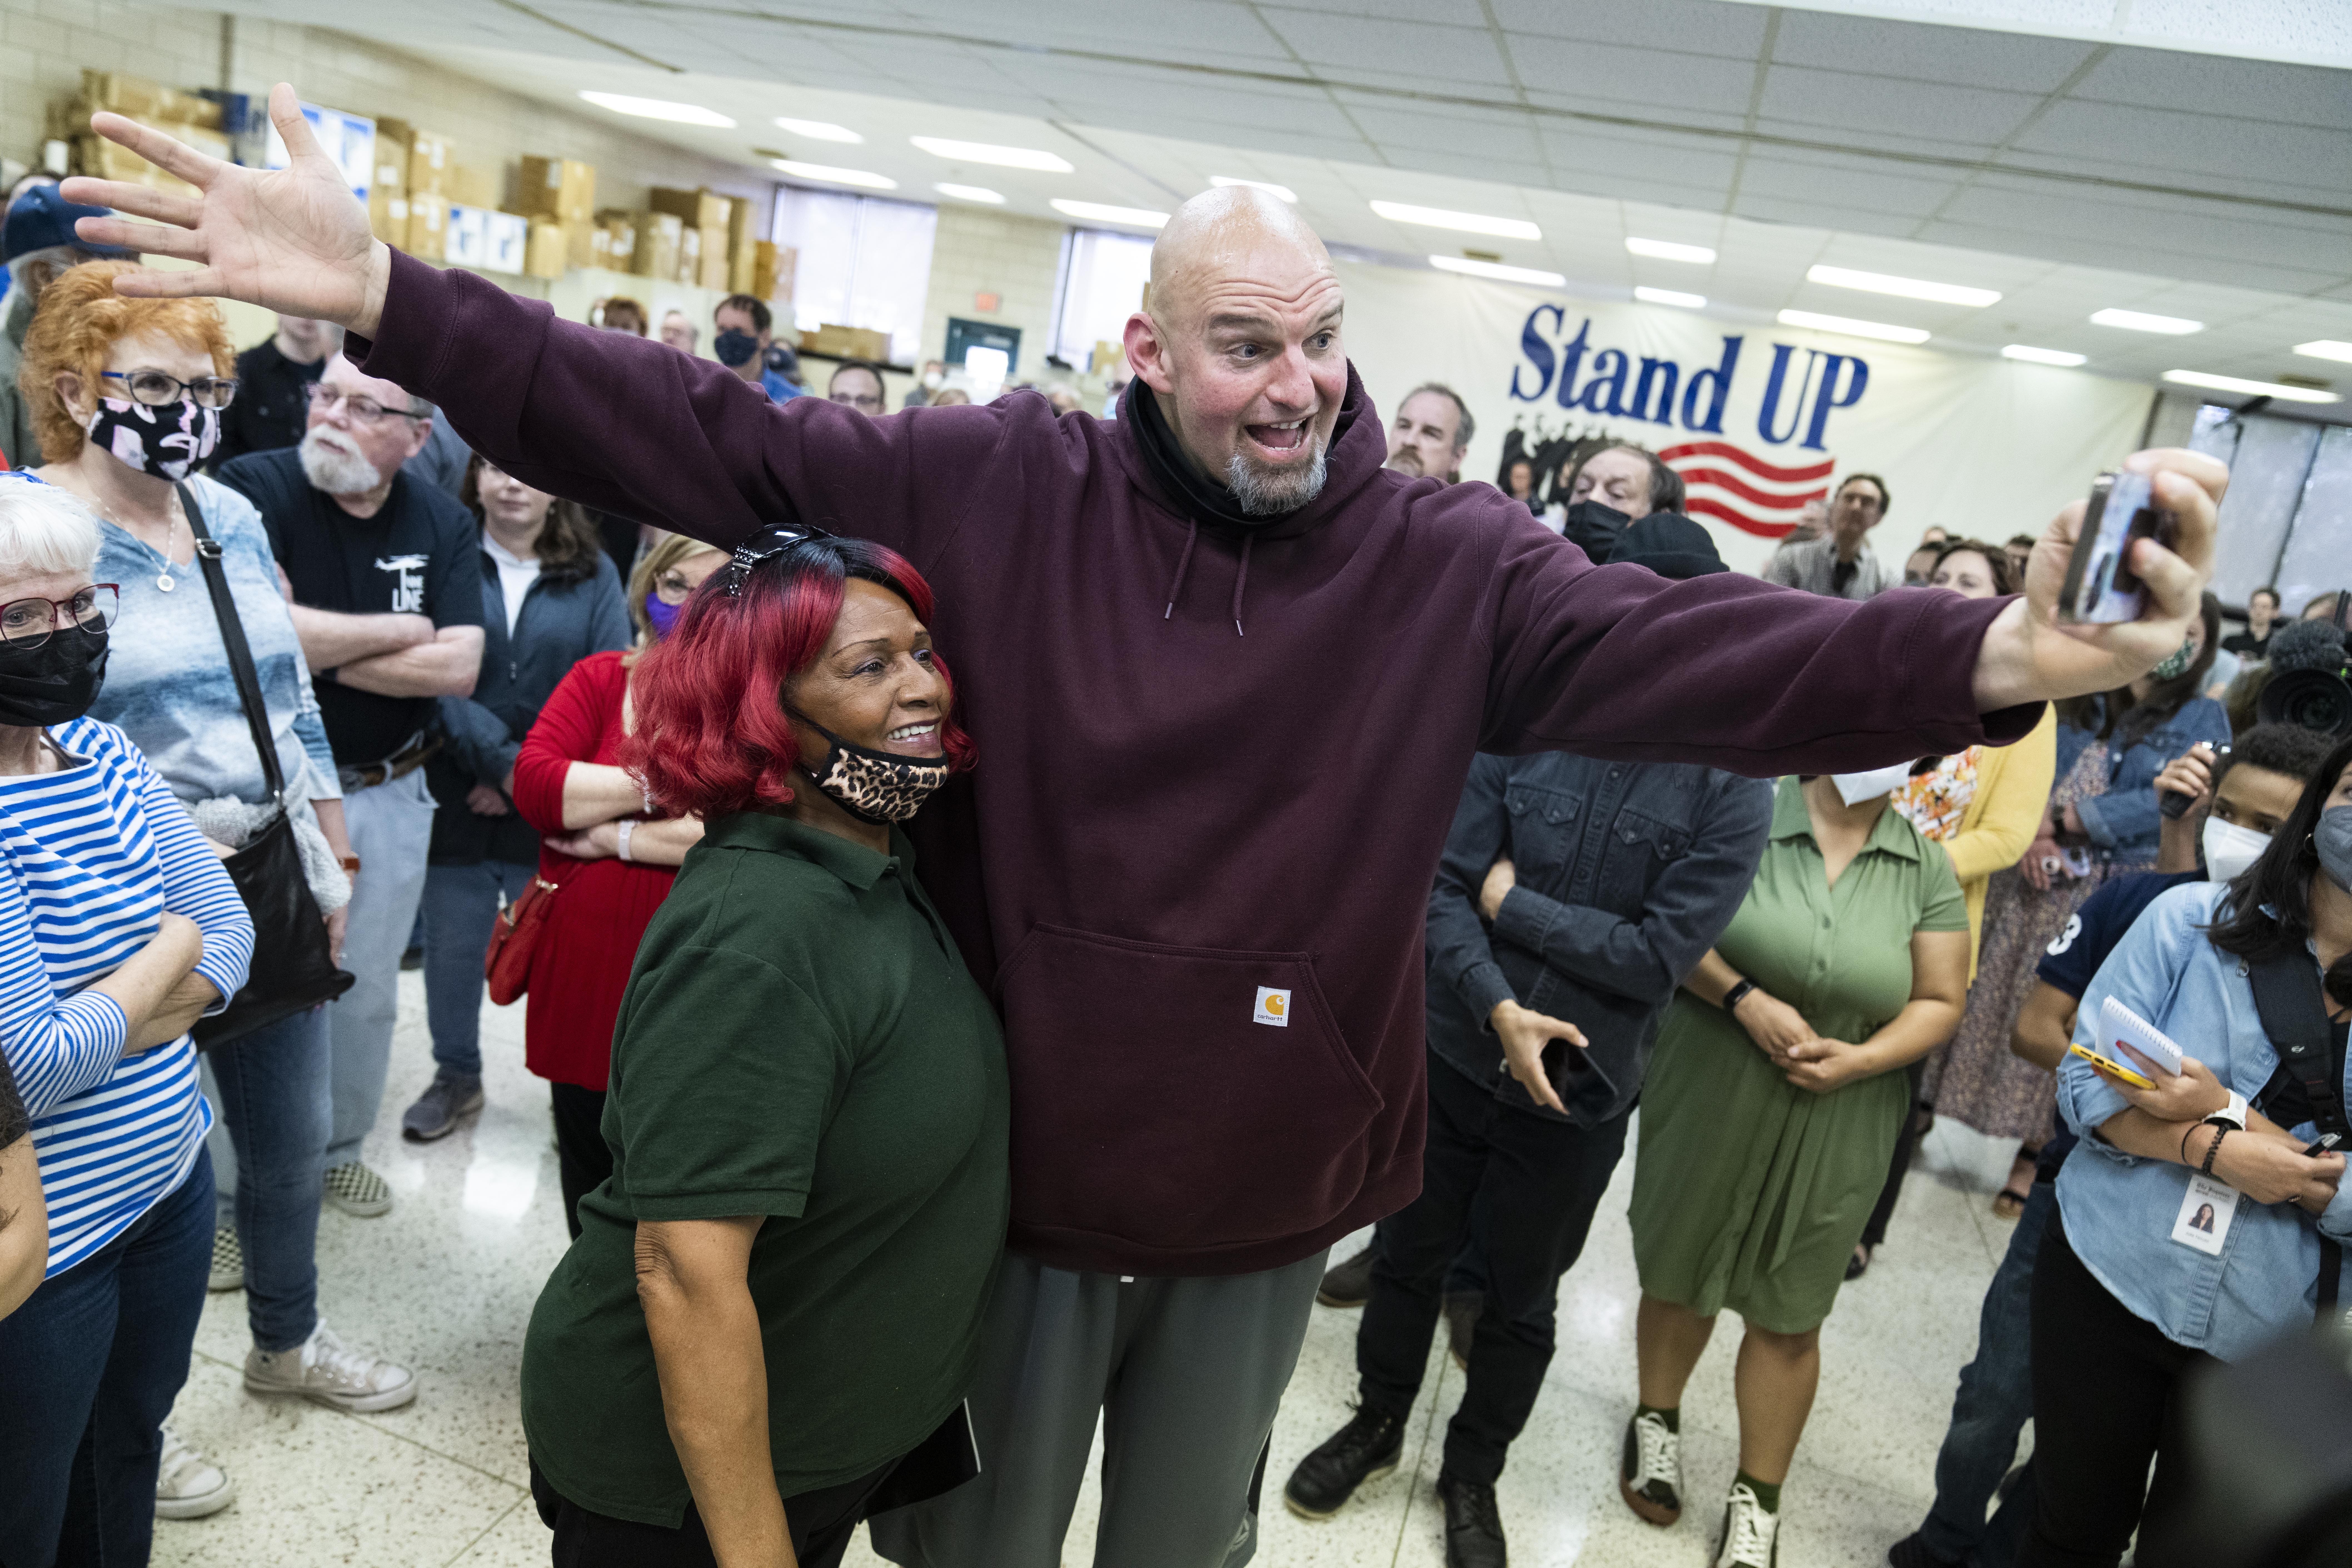 Pennsylvania Lt. Gov. John Fetterman (D) greets supporters while campaigning for U.S. Senate at the UFCW Local 1776 KS headquarters in Plymouth Meeting on April 16, 2022.